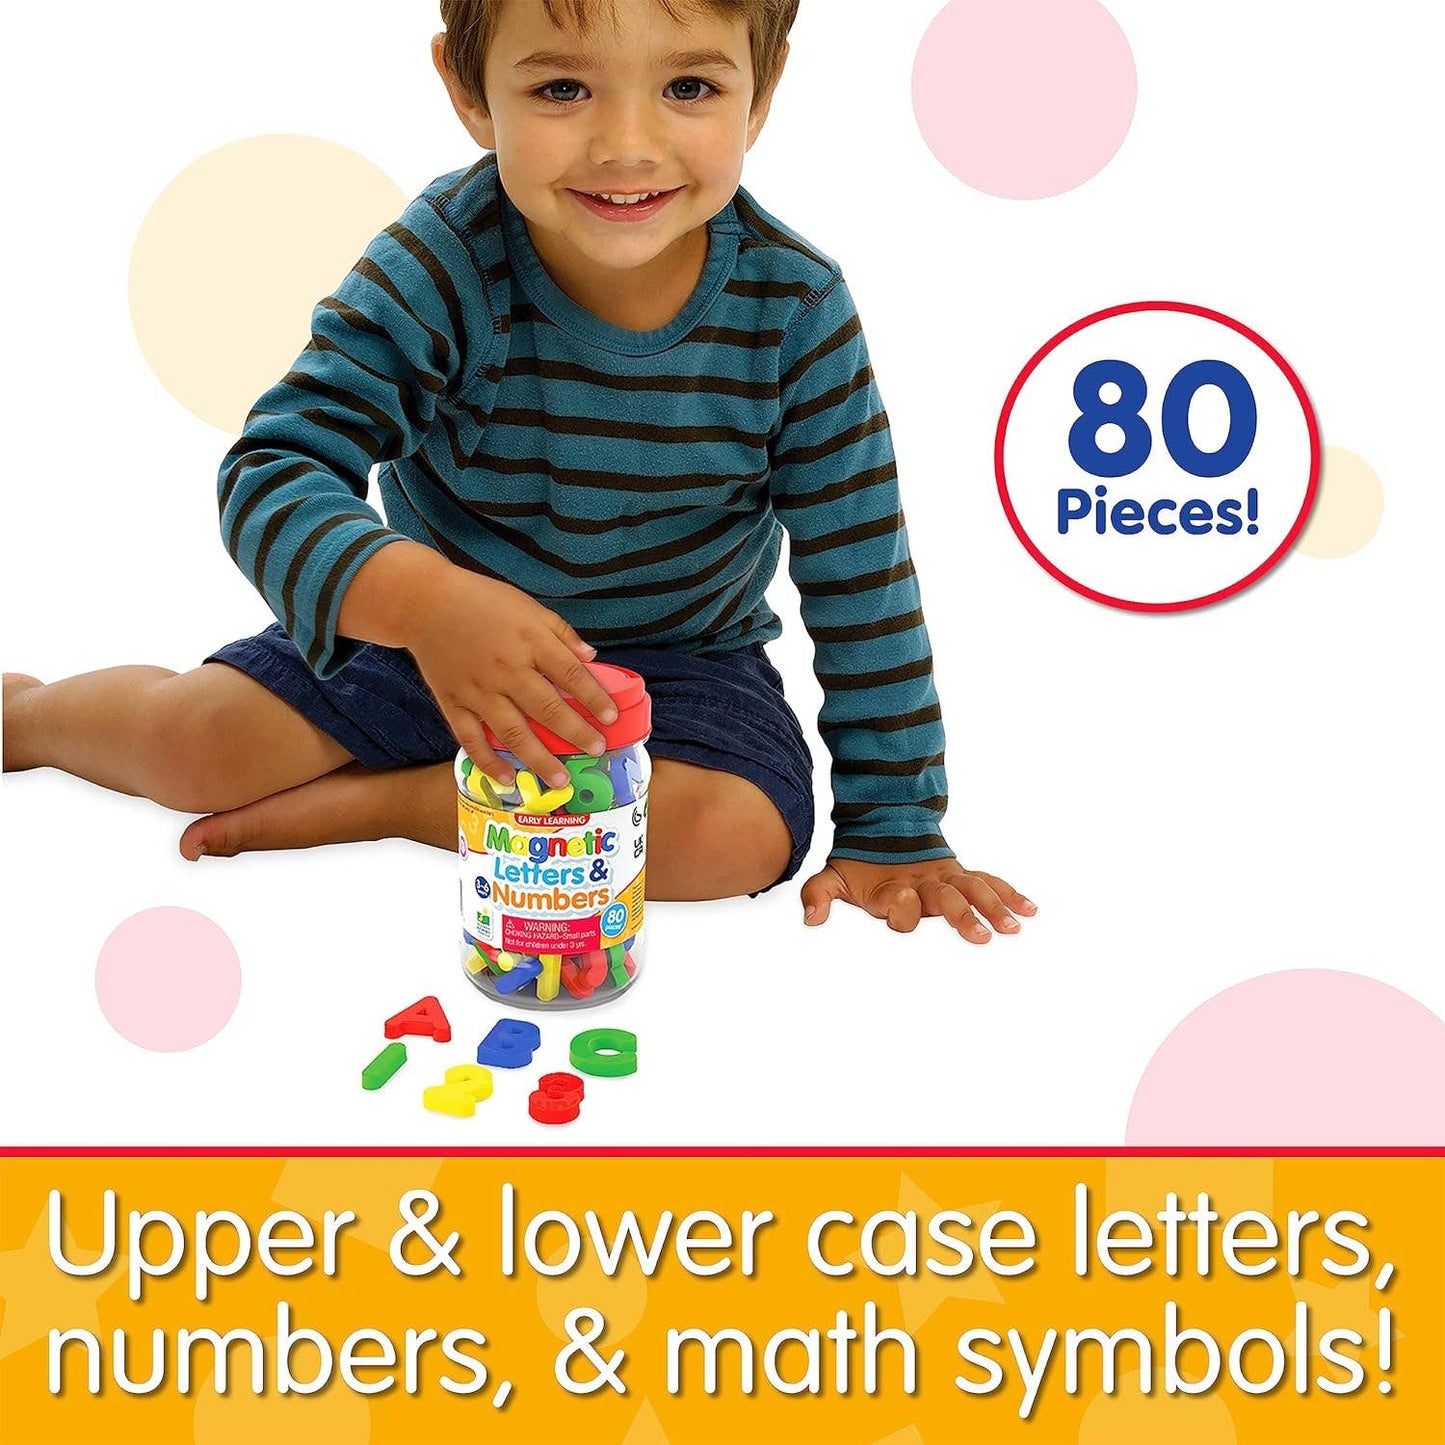 Early Learning – Magnetic Letters & Numbers: Plastic